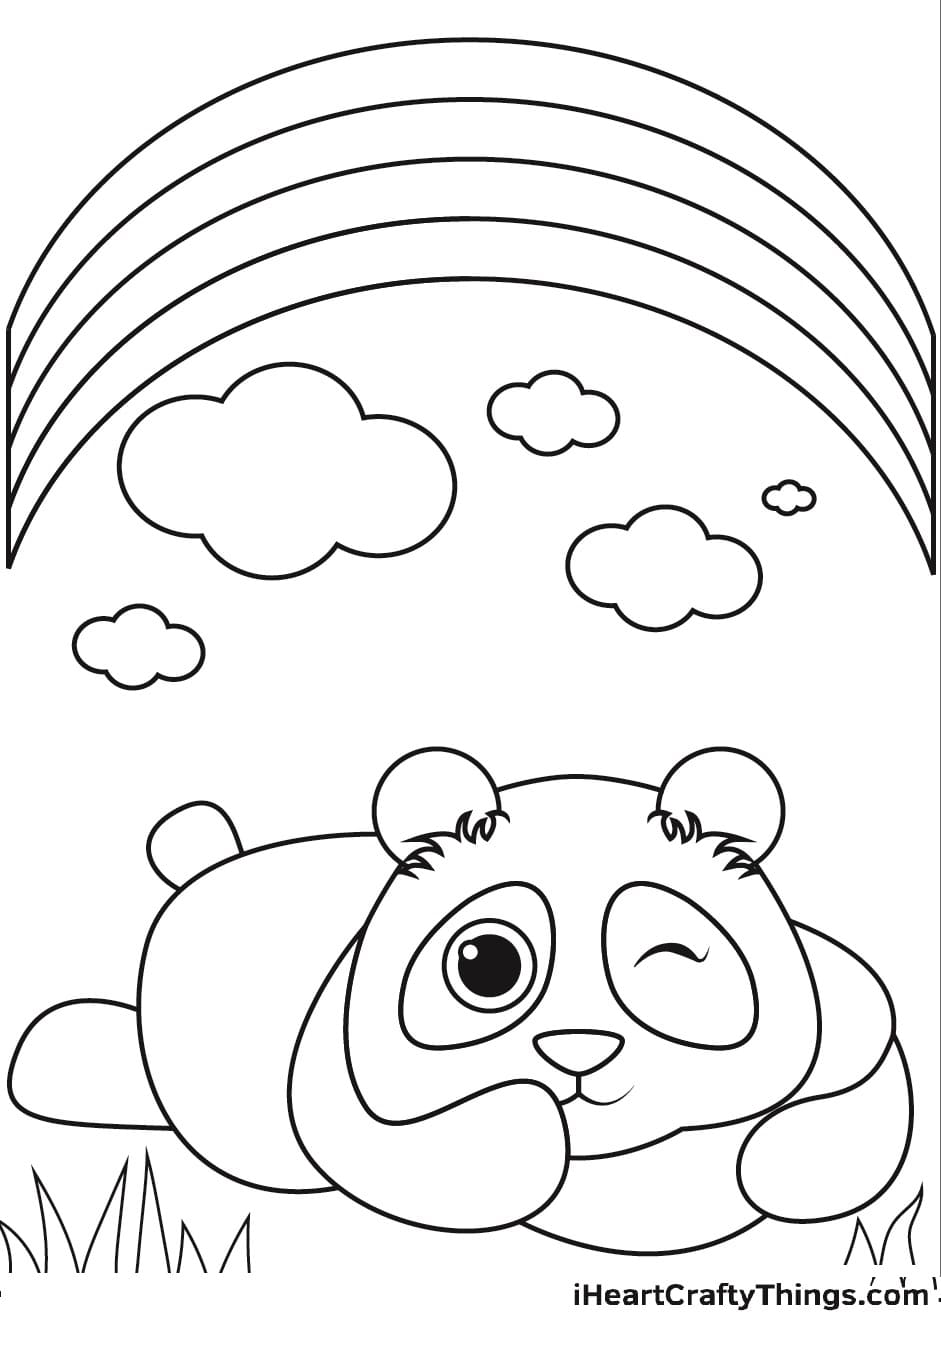 Lovely Giant Panda For Children Coloring Page